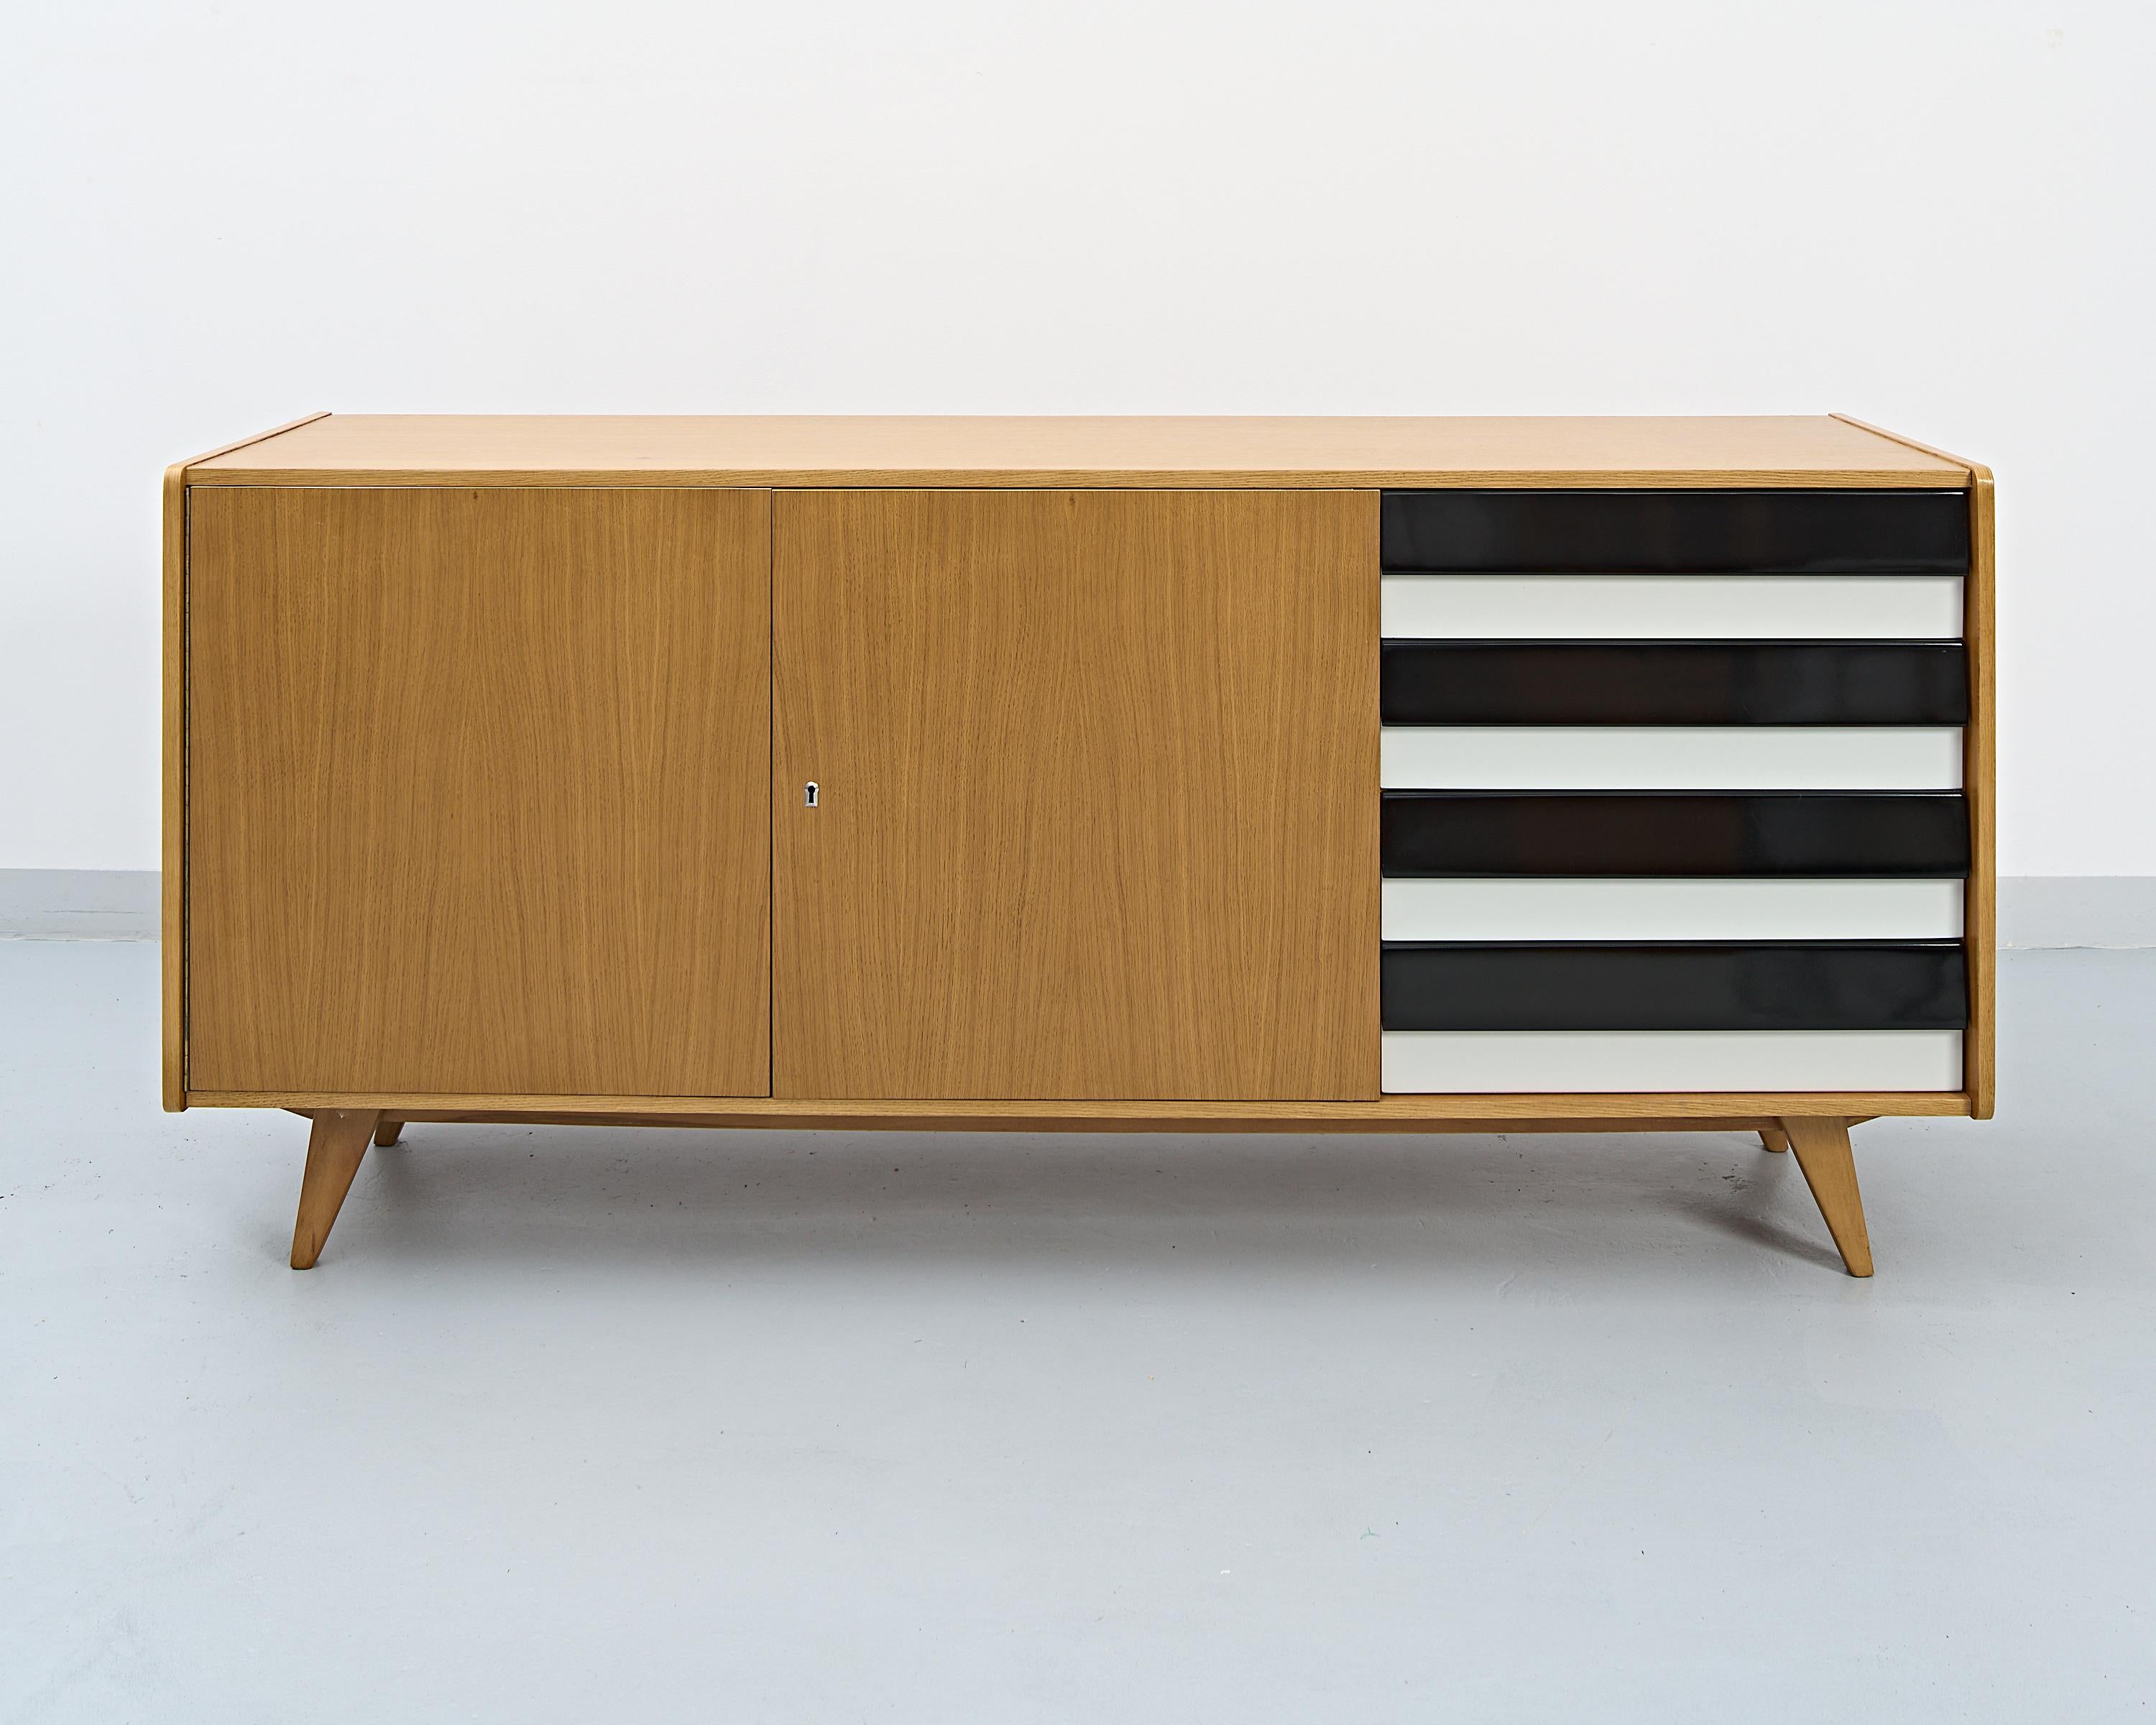 The U-460 sideboard designed by the czech designer Jiří Jiroutek as a part of the U series. Works began after the enormous success of the Czechoslovakian pavilion at the Brussels ’58 expo and the series became one of the leading examples of the